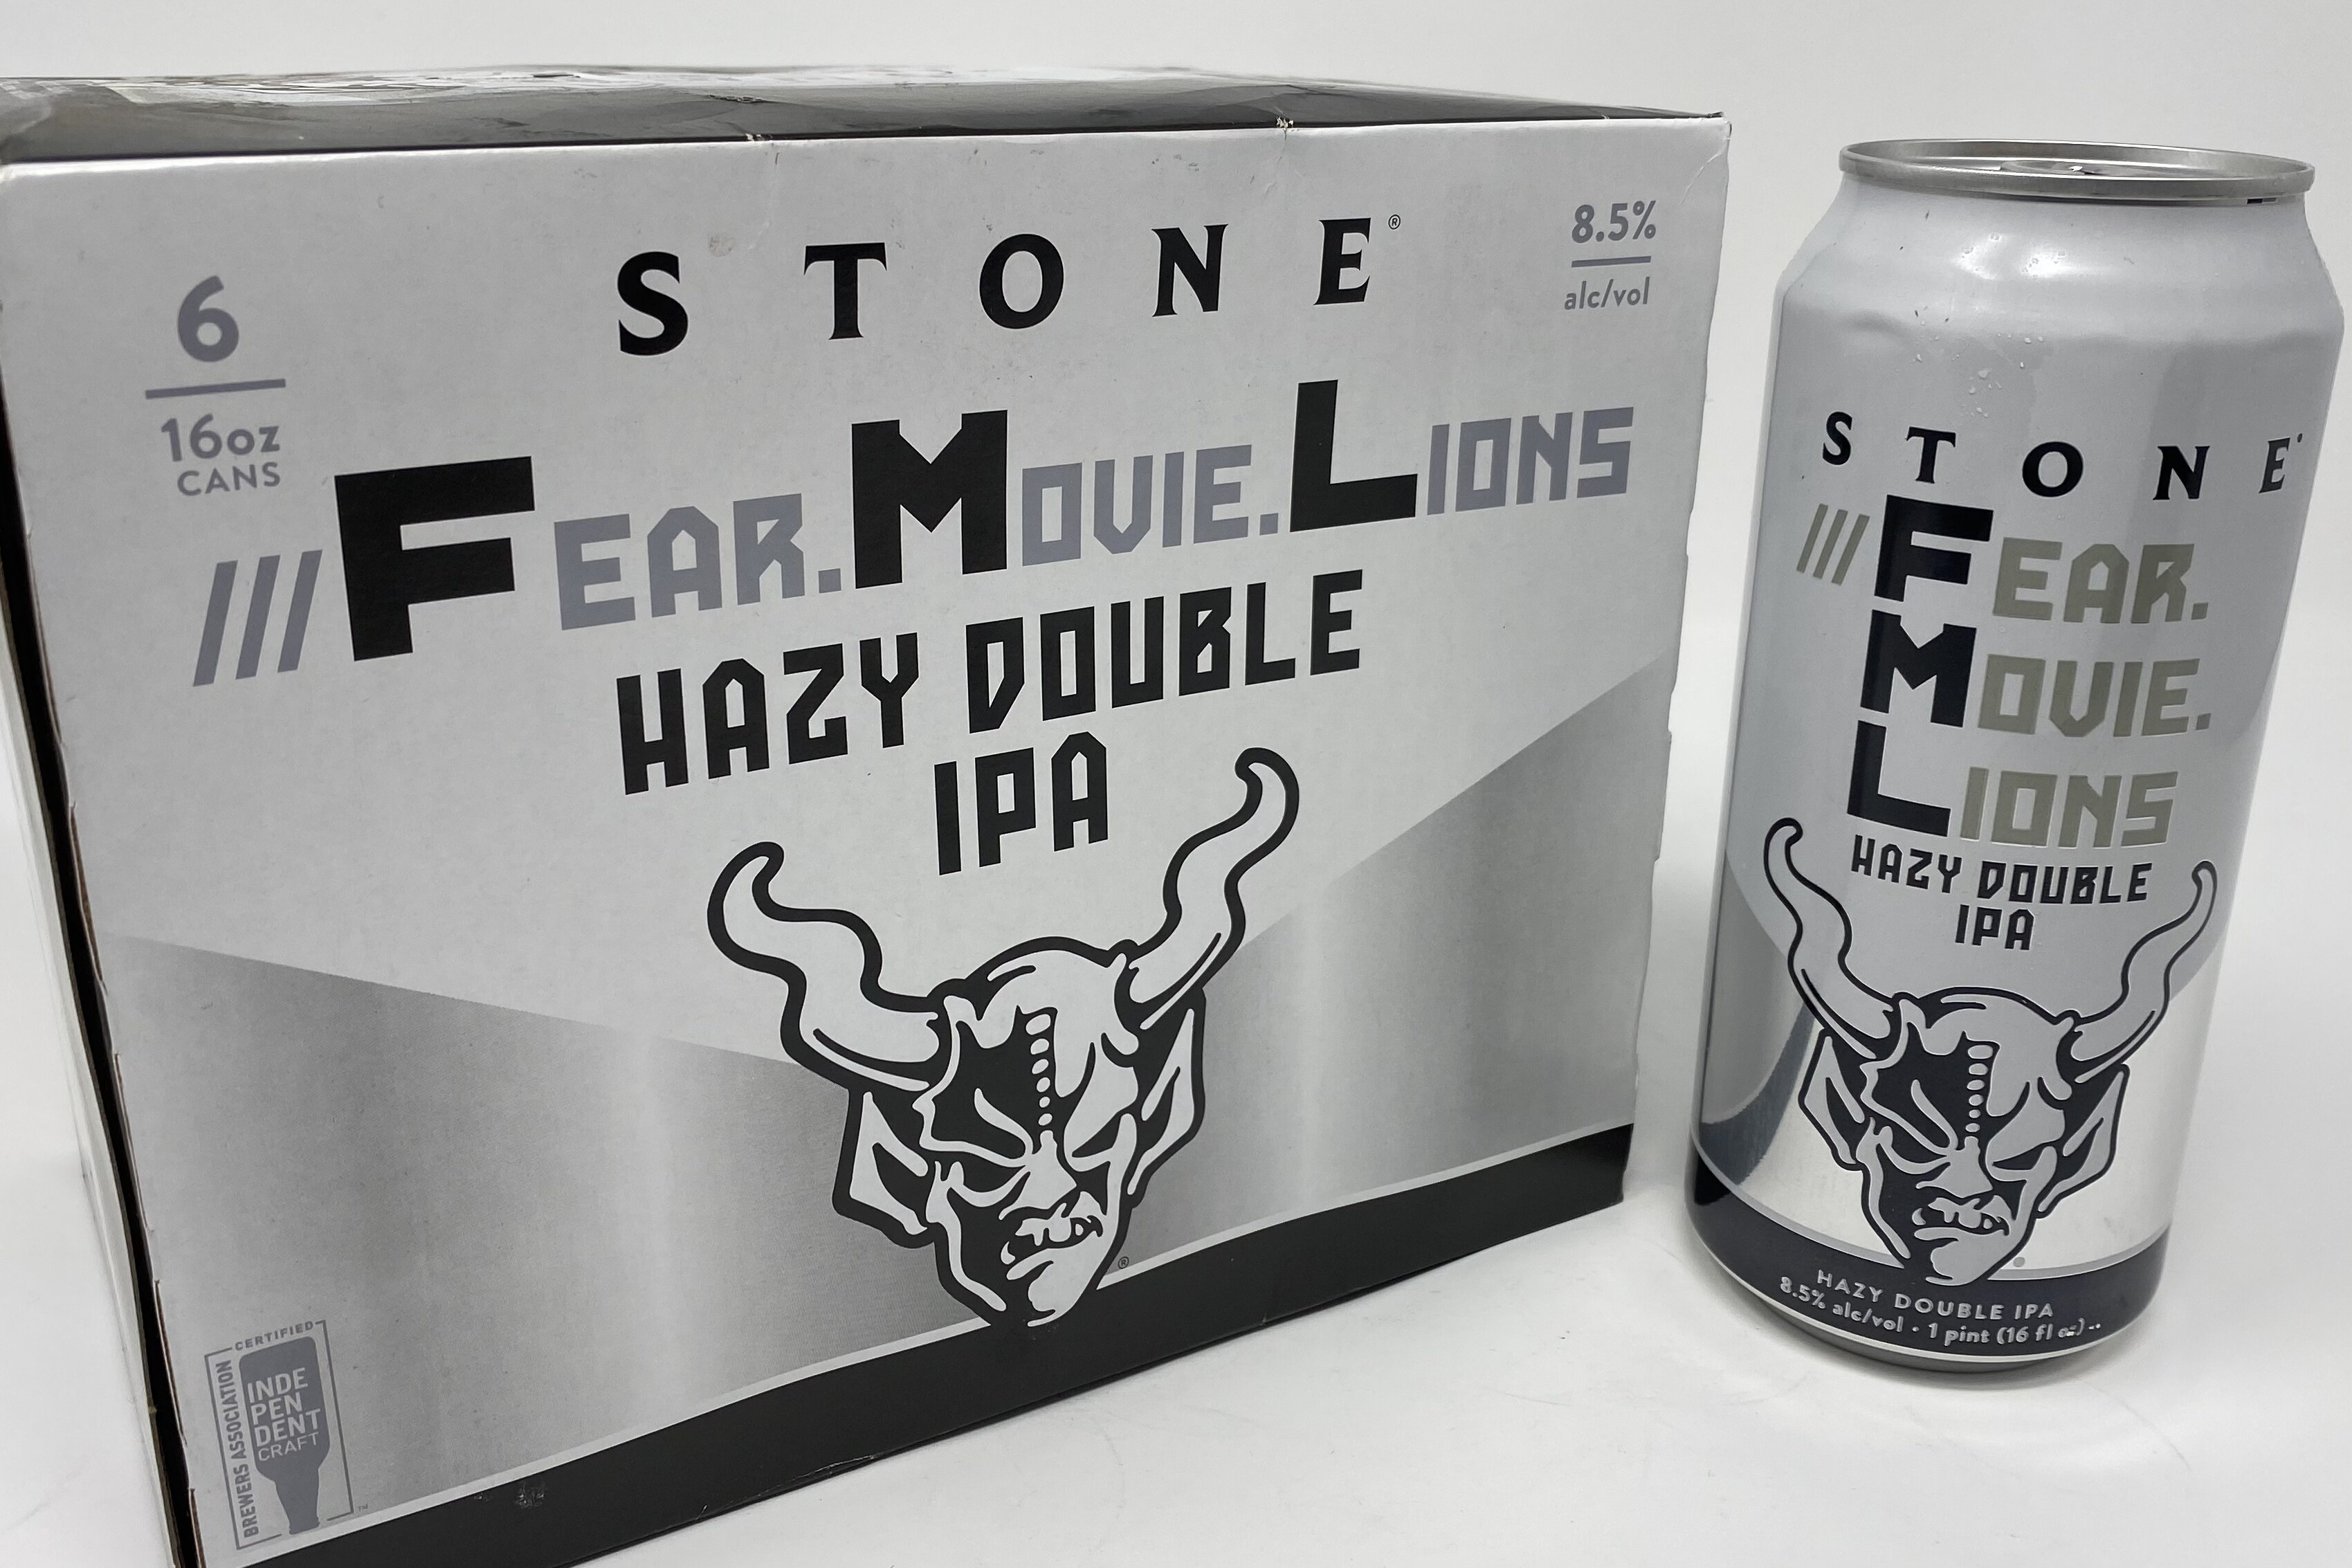 Stone Brewing Co., Fear Movie Lions Double IPA